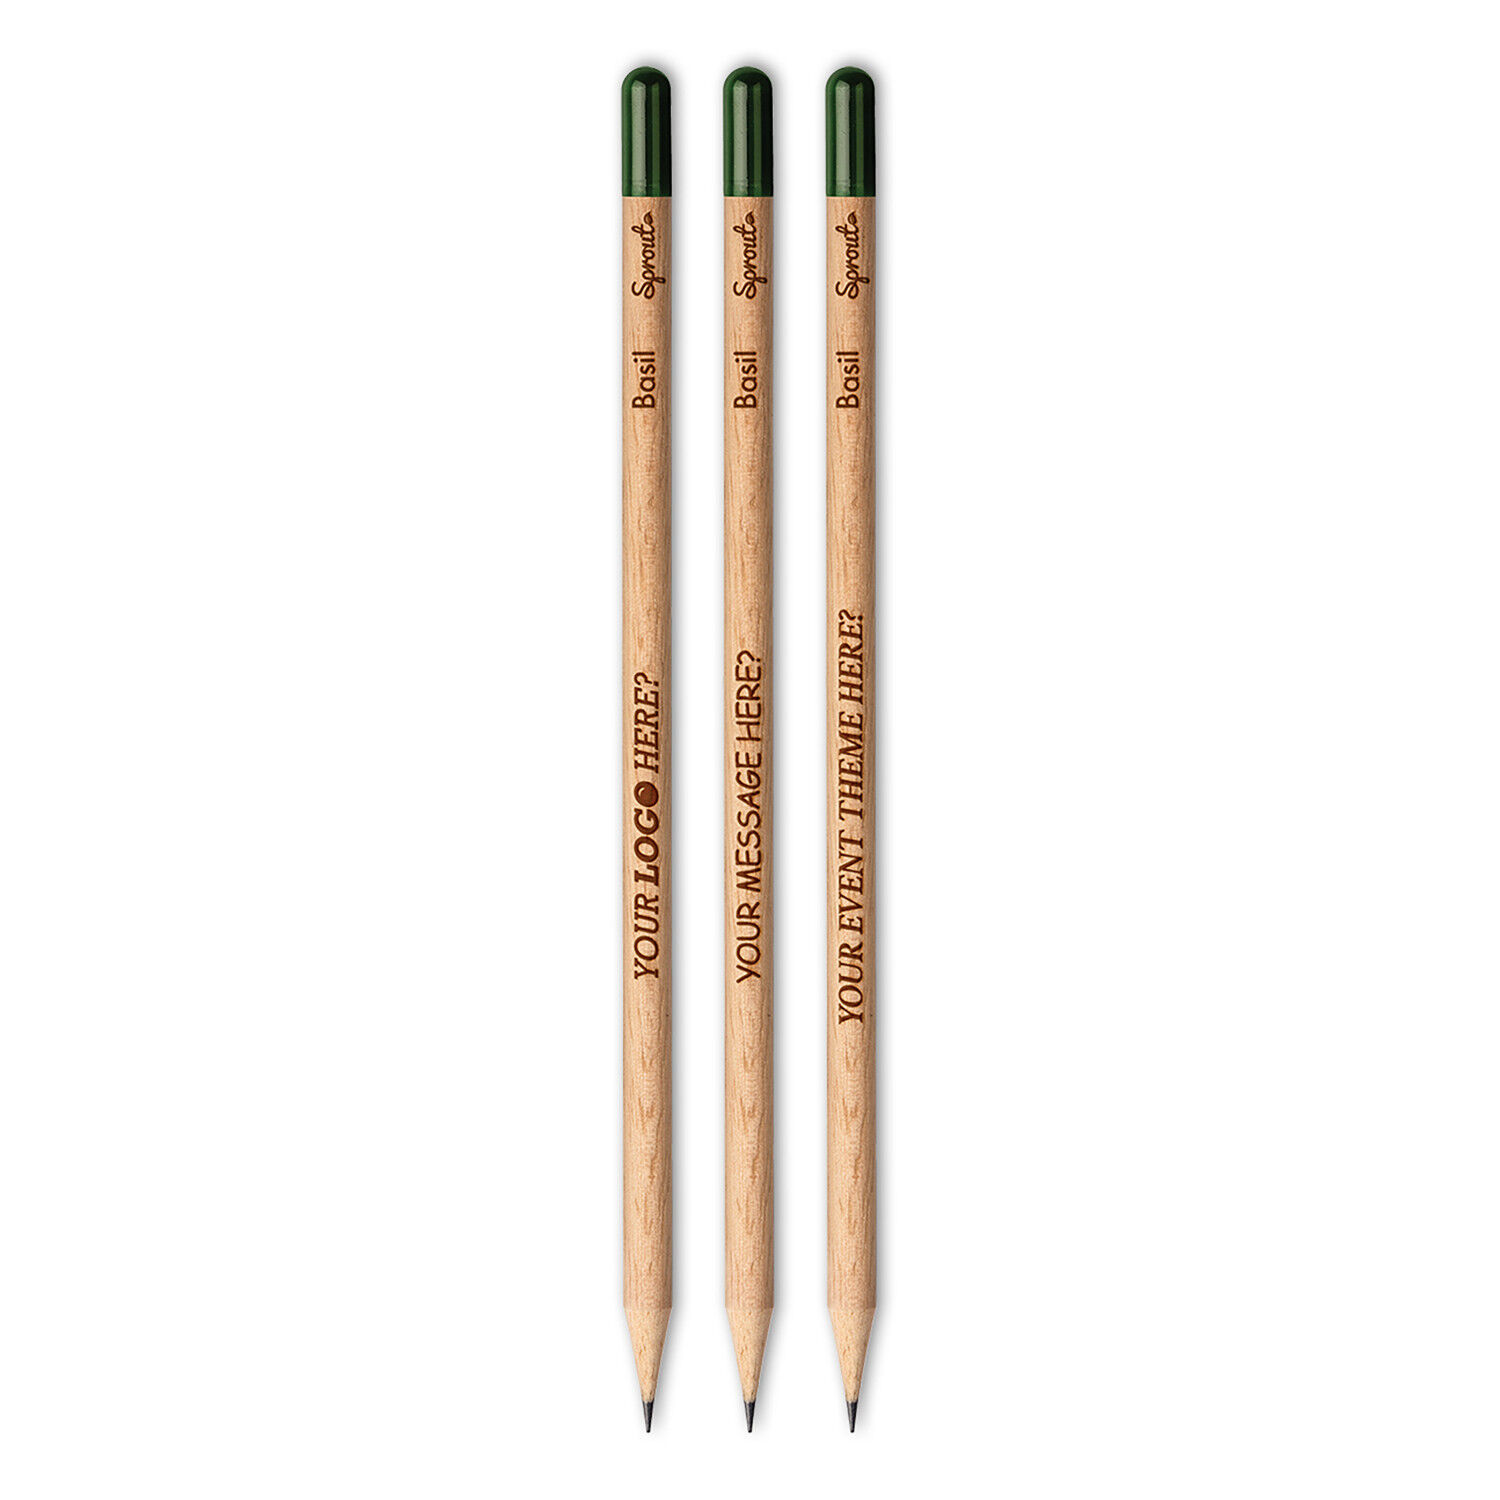 Sprout Seed Pencil with Printed Sleeve